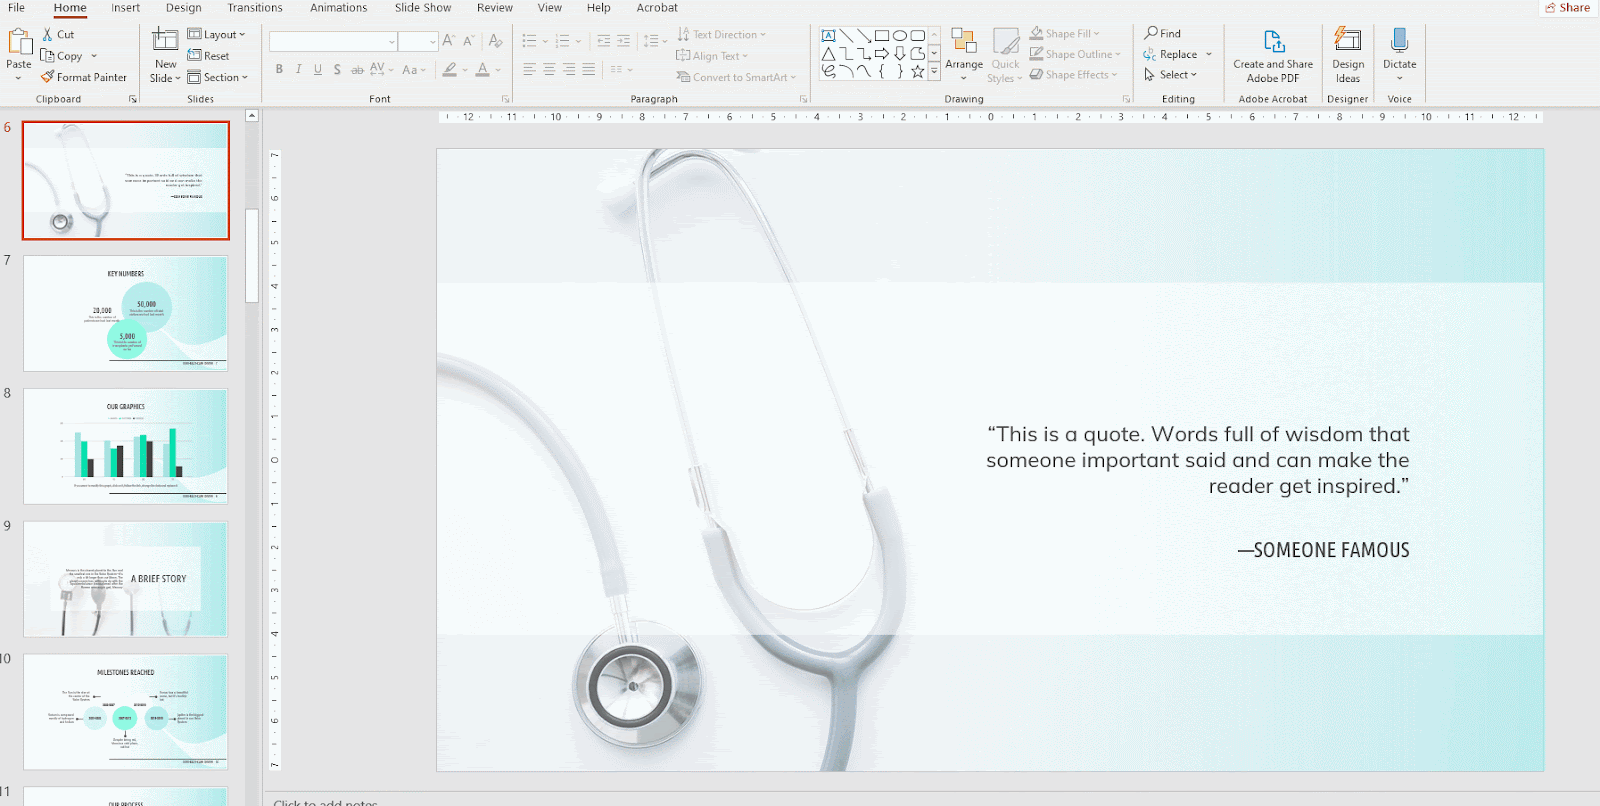 How to Create a Watermark in PowerPoint - Tutorial